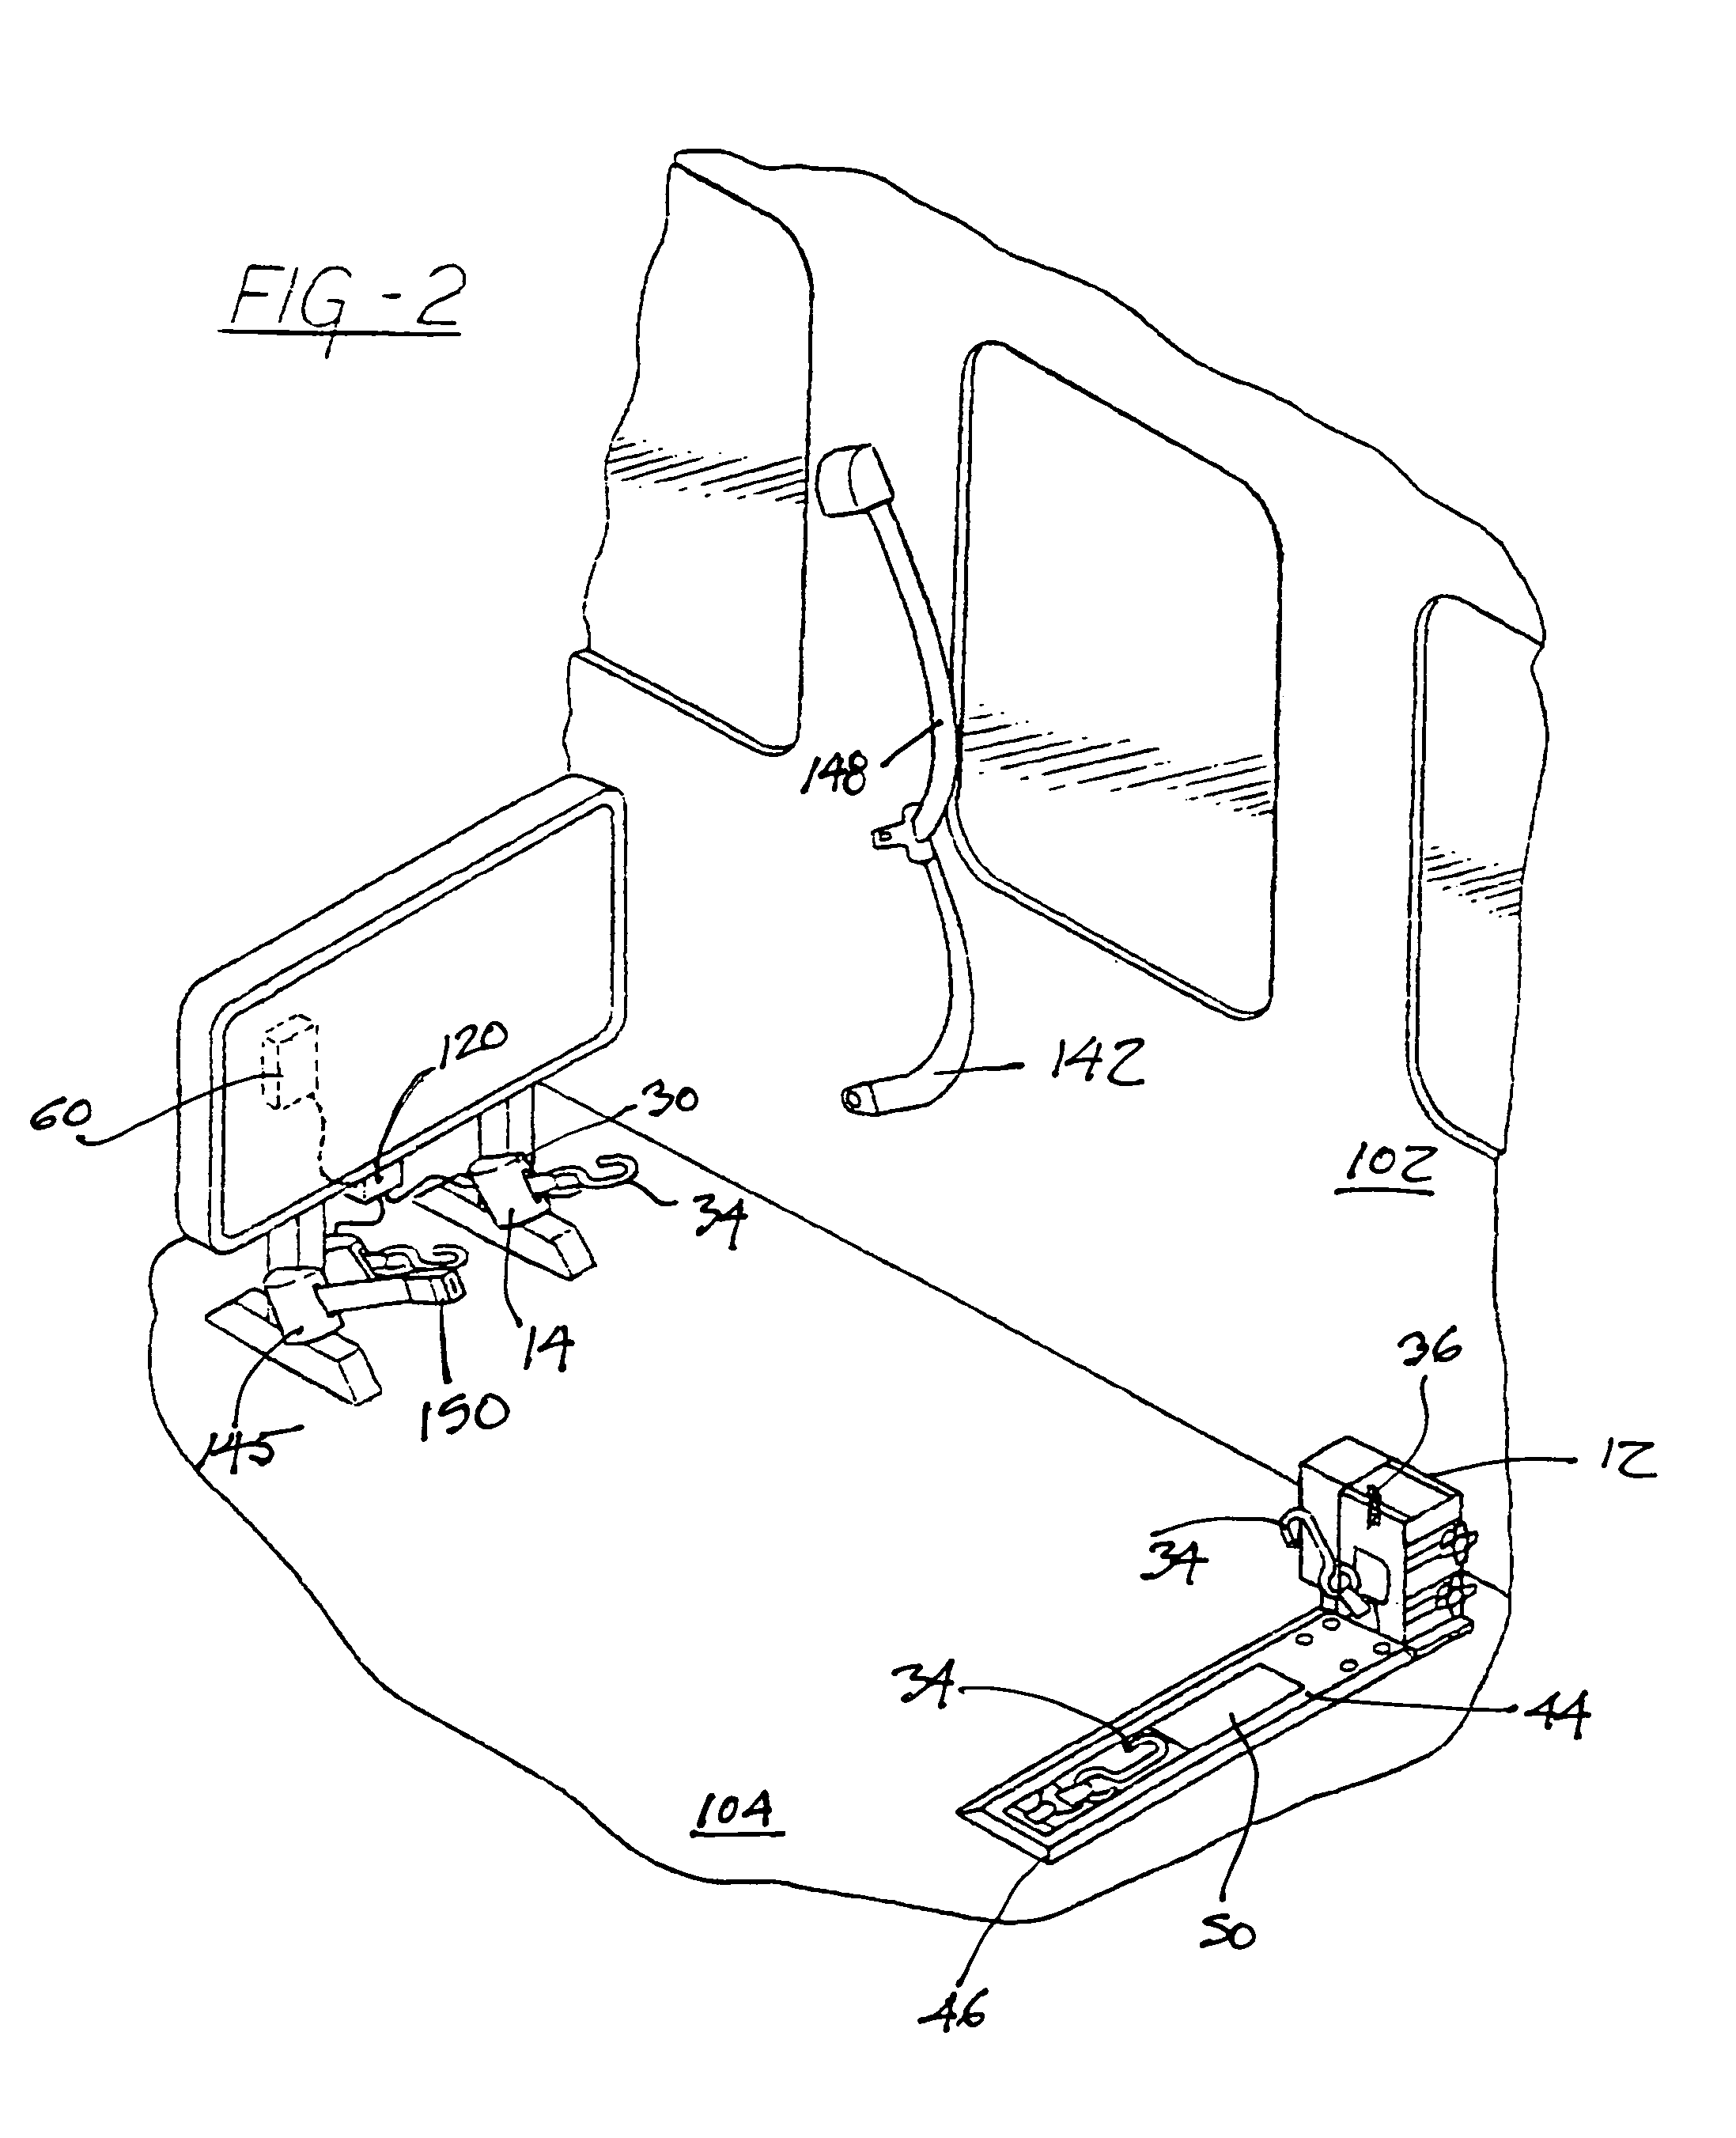 Electro mechanical webbed pre-tensioning wheelchair securement system